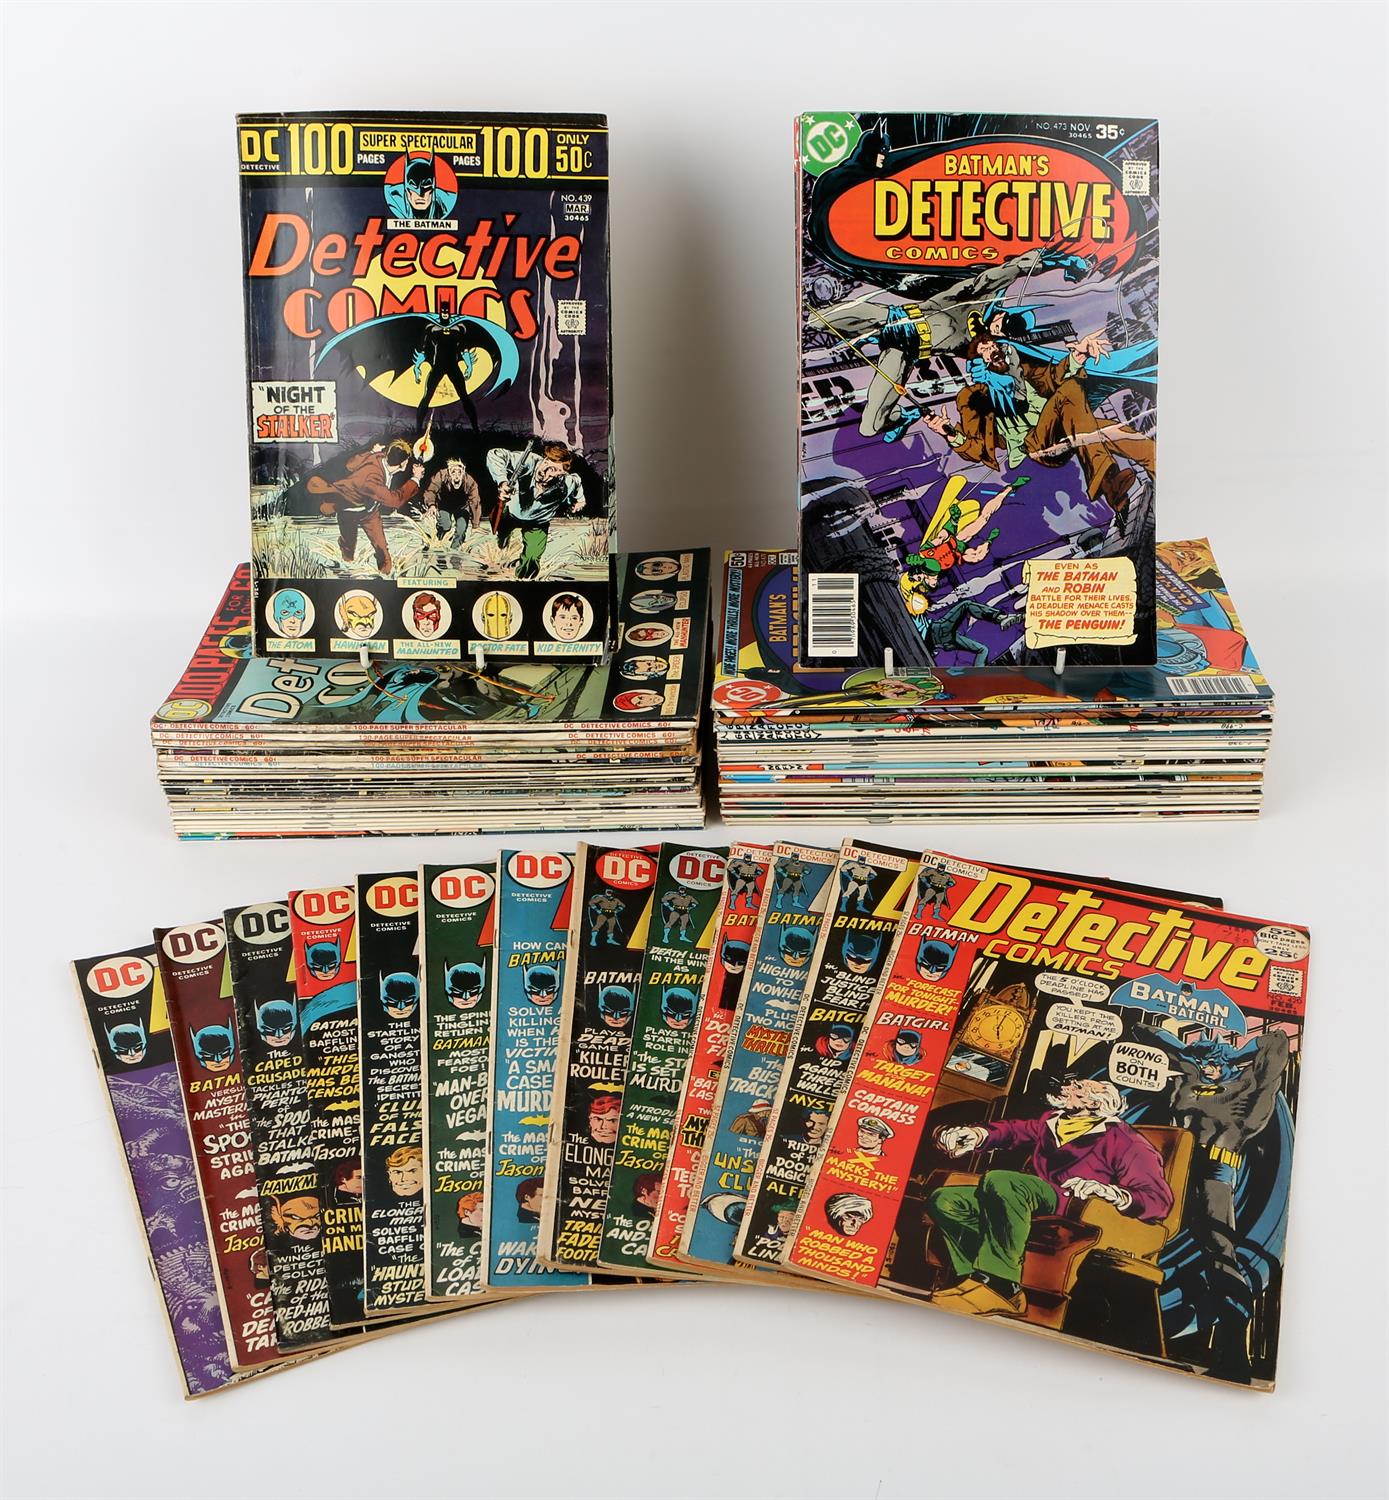 DC Comics: A group of 68 Detective Comics featuring notable and key issues (1972 onwards).